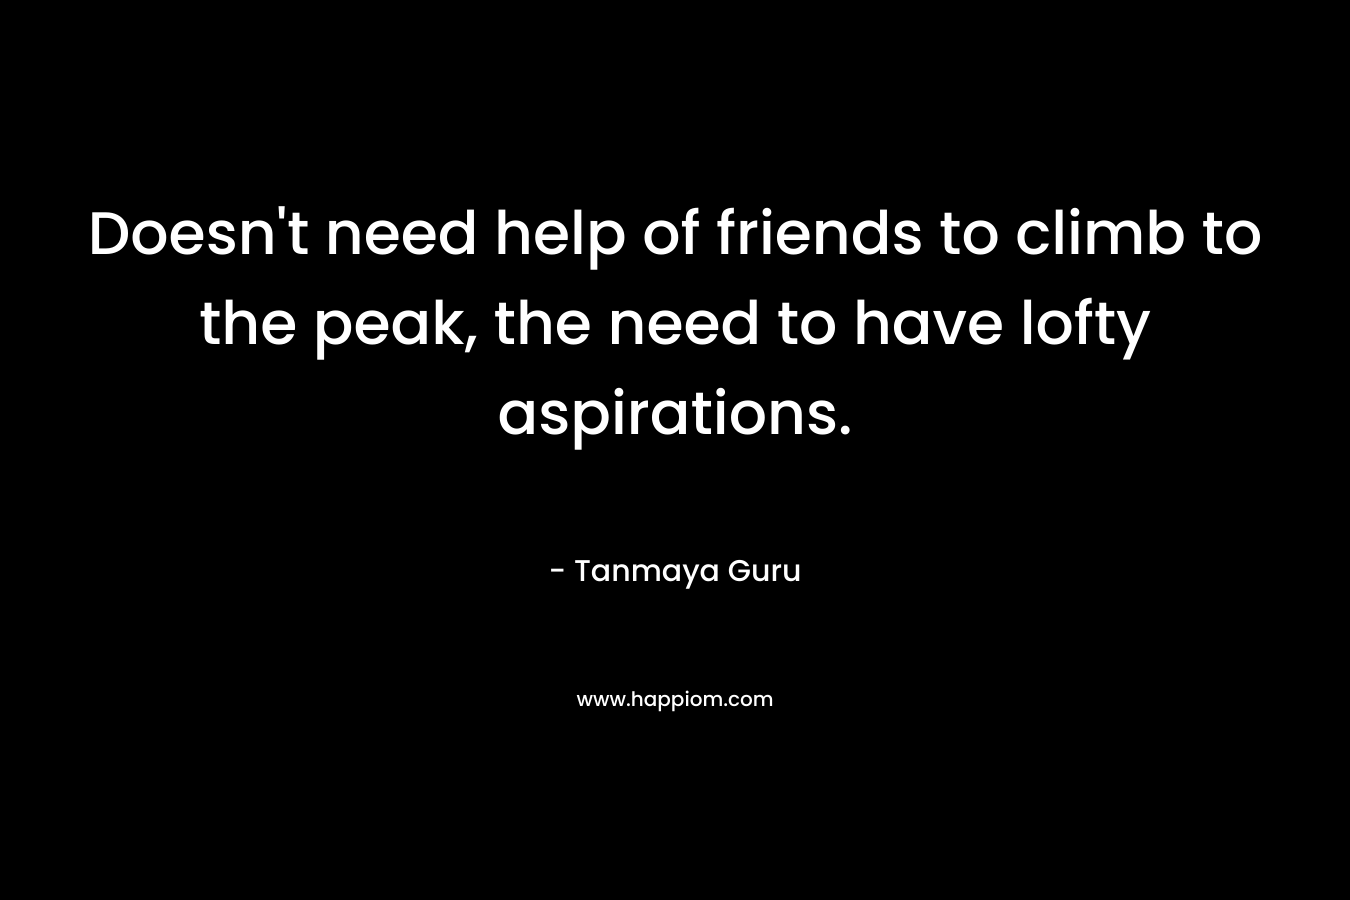 Doesn’t need help of friends to climb to the peak, the need to have lofty aspirations. – Tanmaya Guru